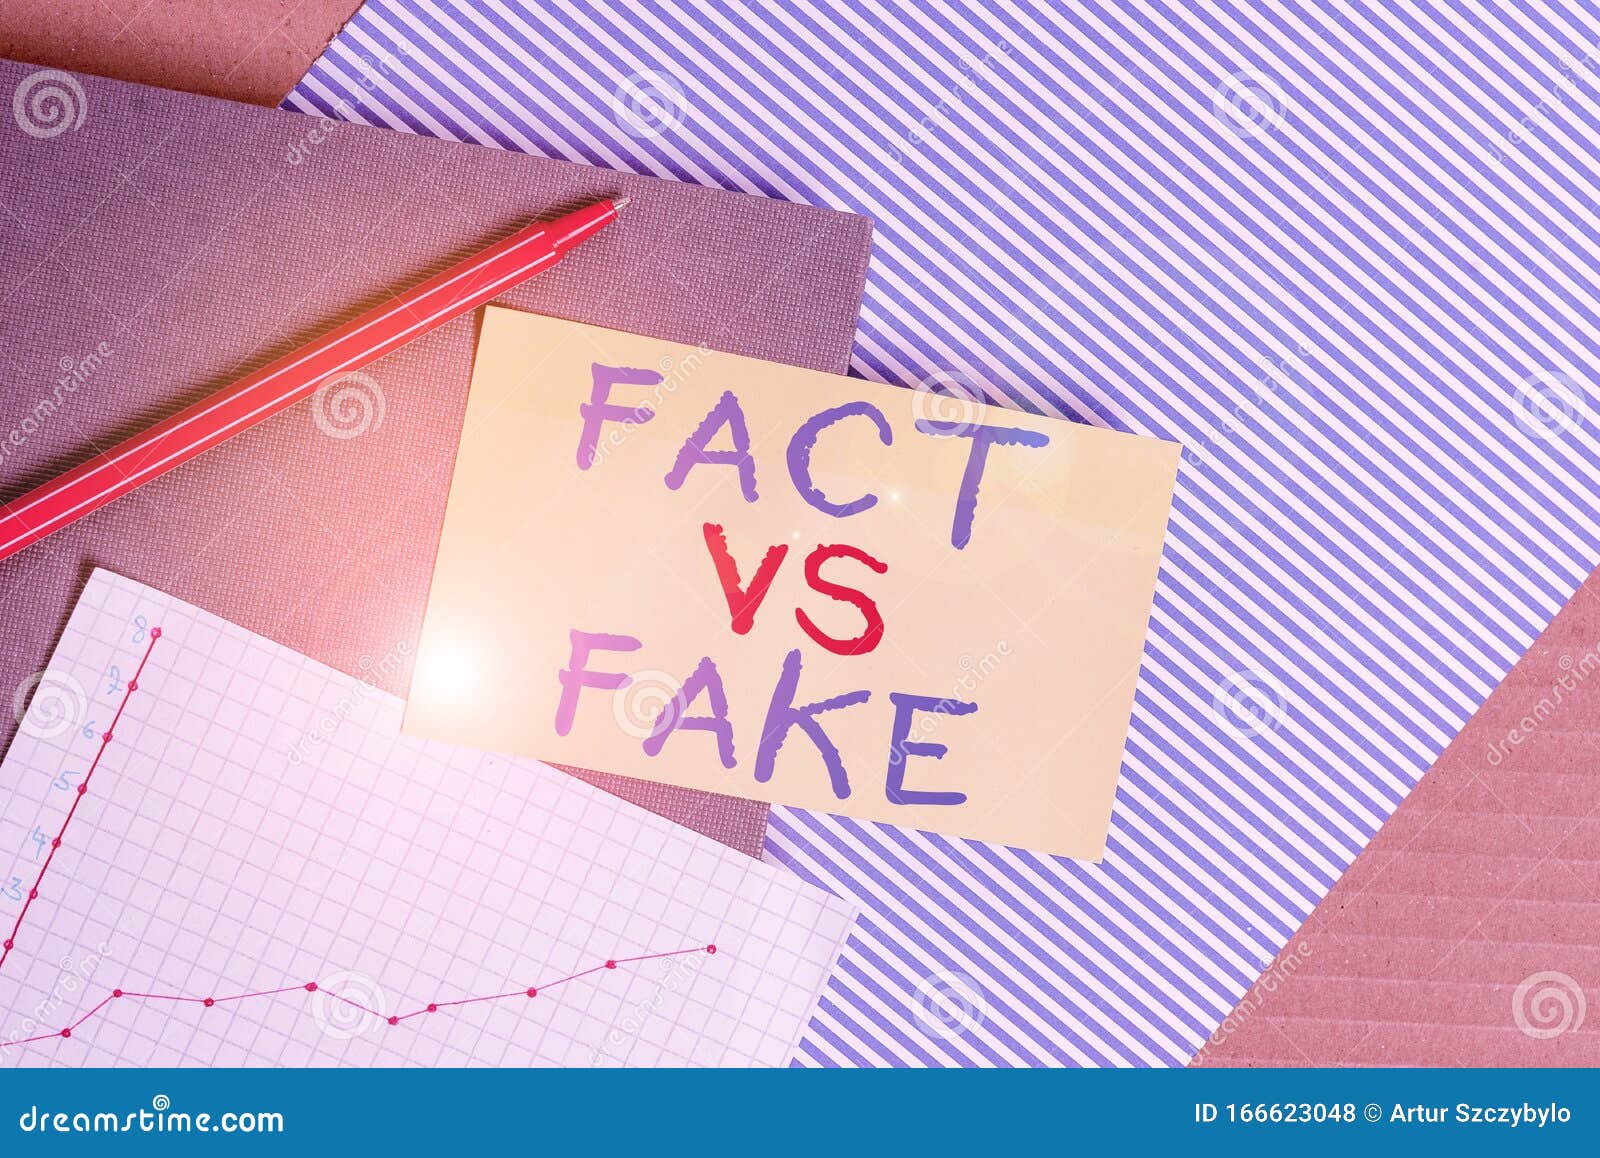 conceptual hand writing showing fact vs fake. business photo showcasing rivalry or products or information originaly